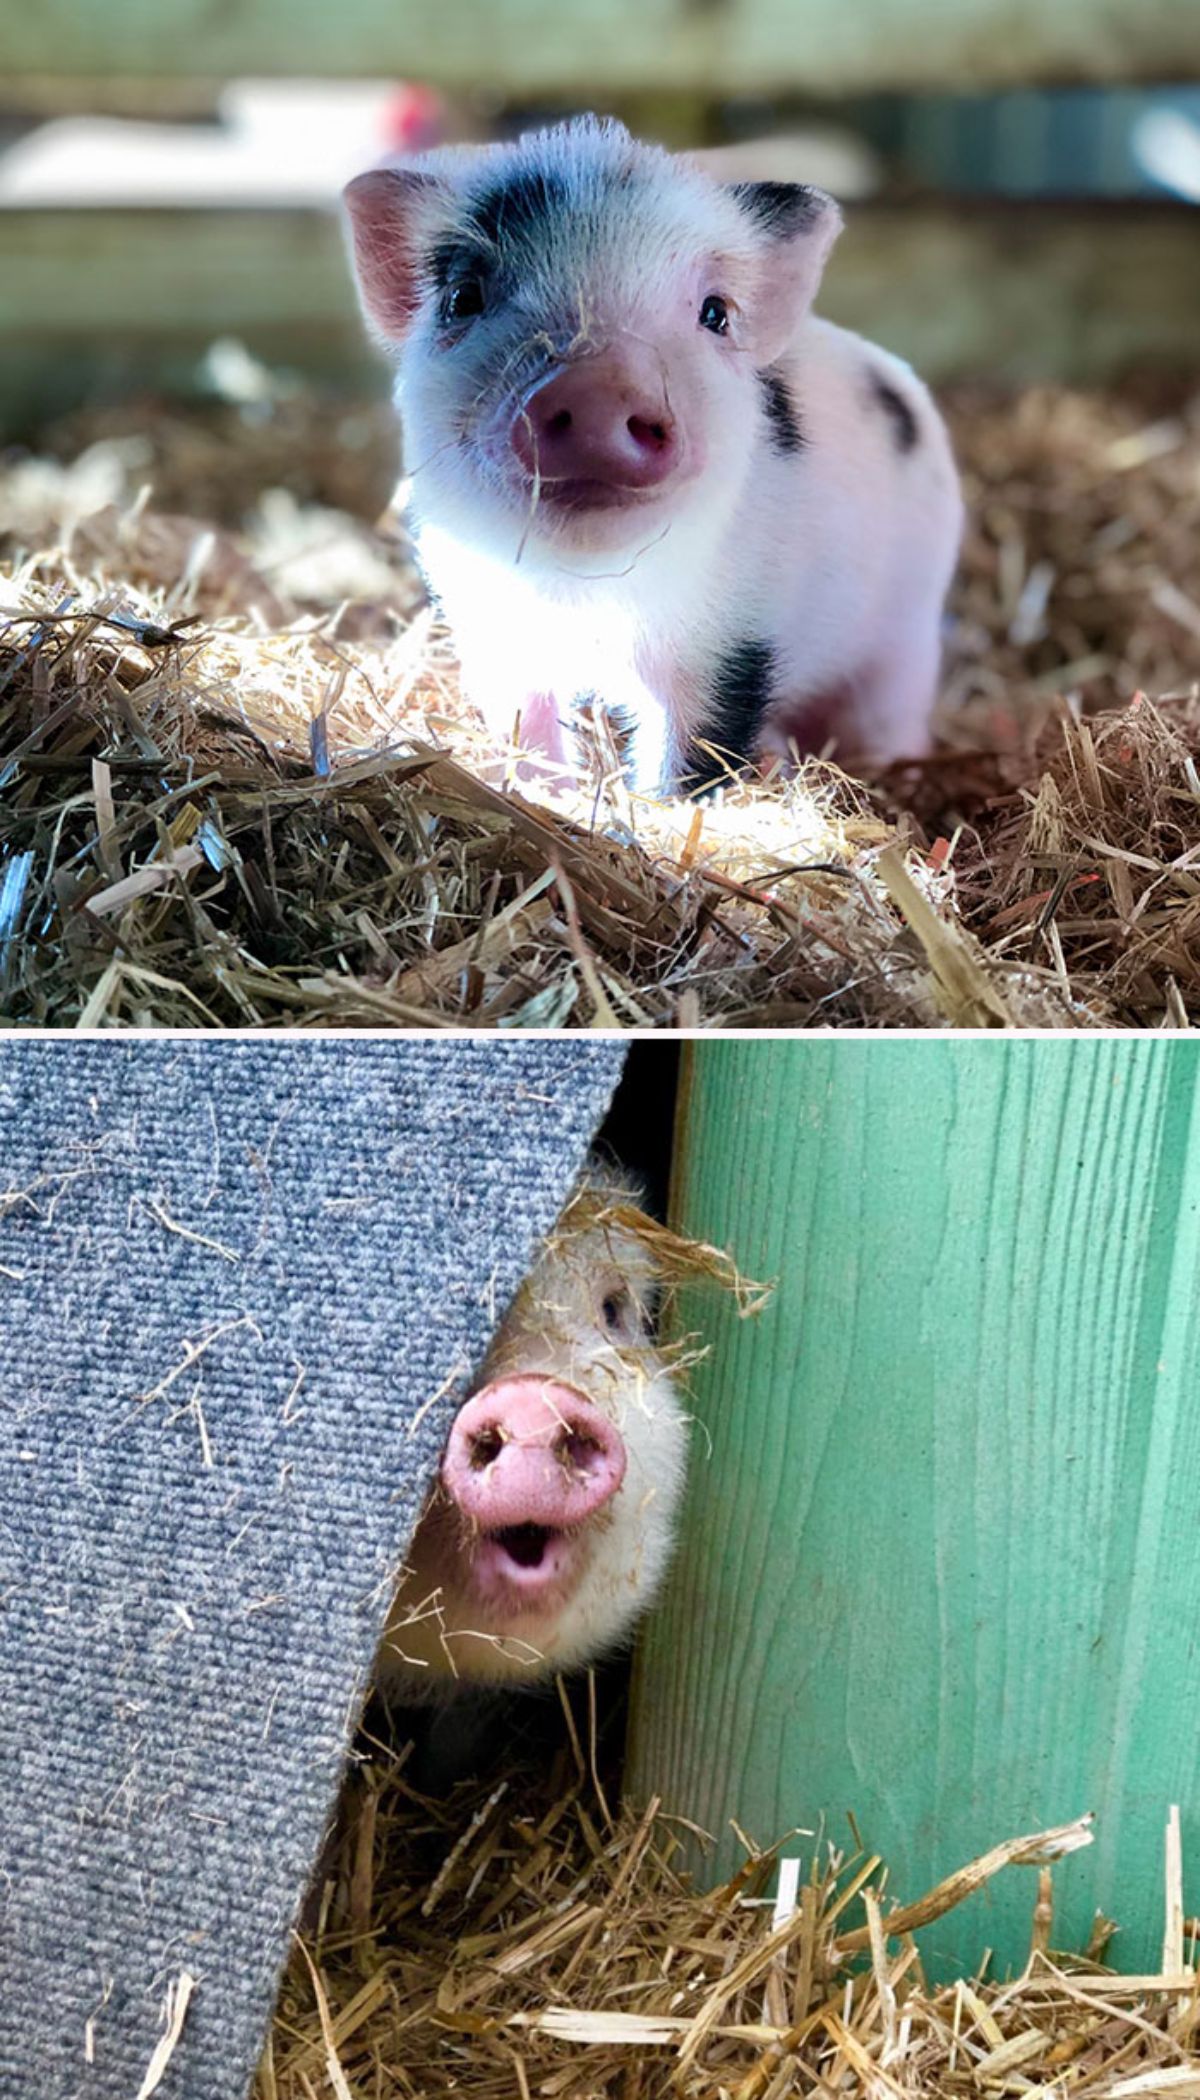 2 photos of a black and white piglet standing in hay